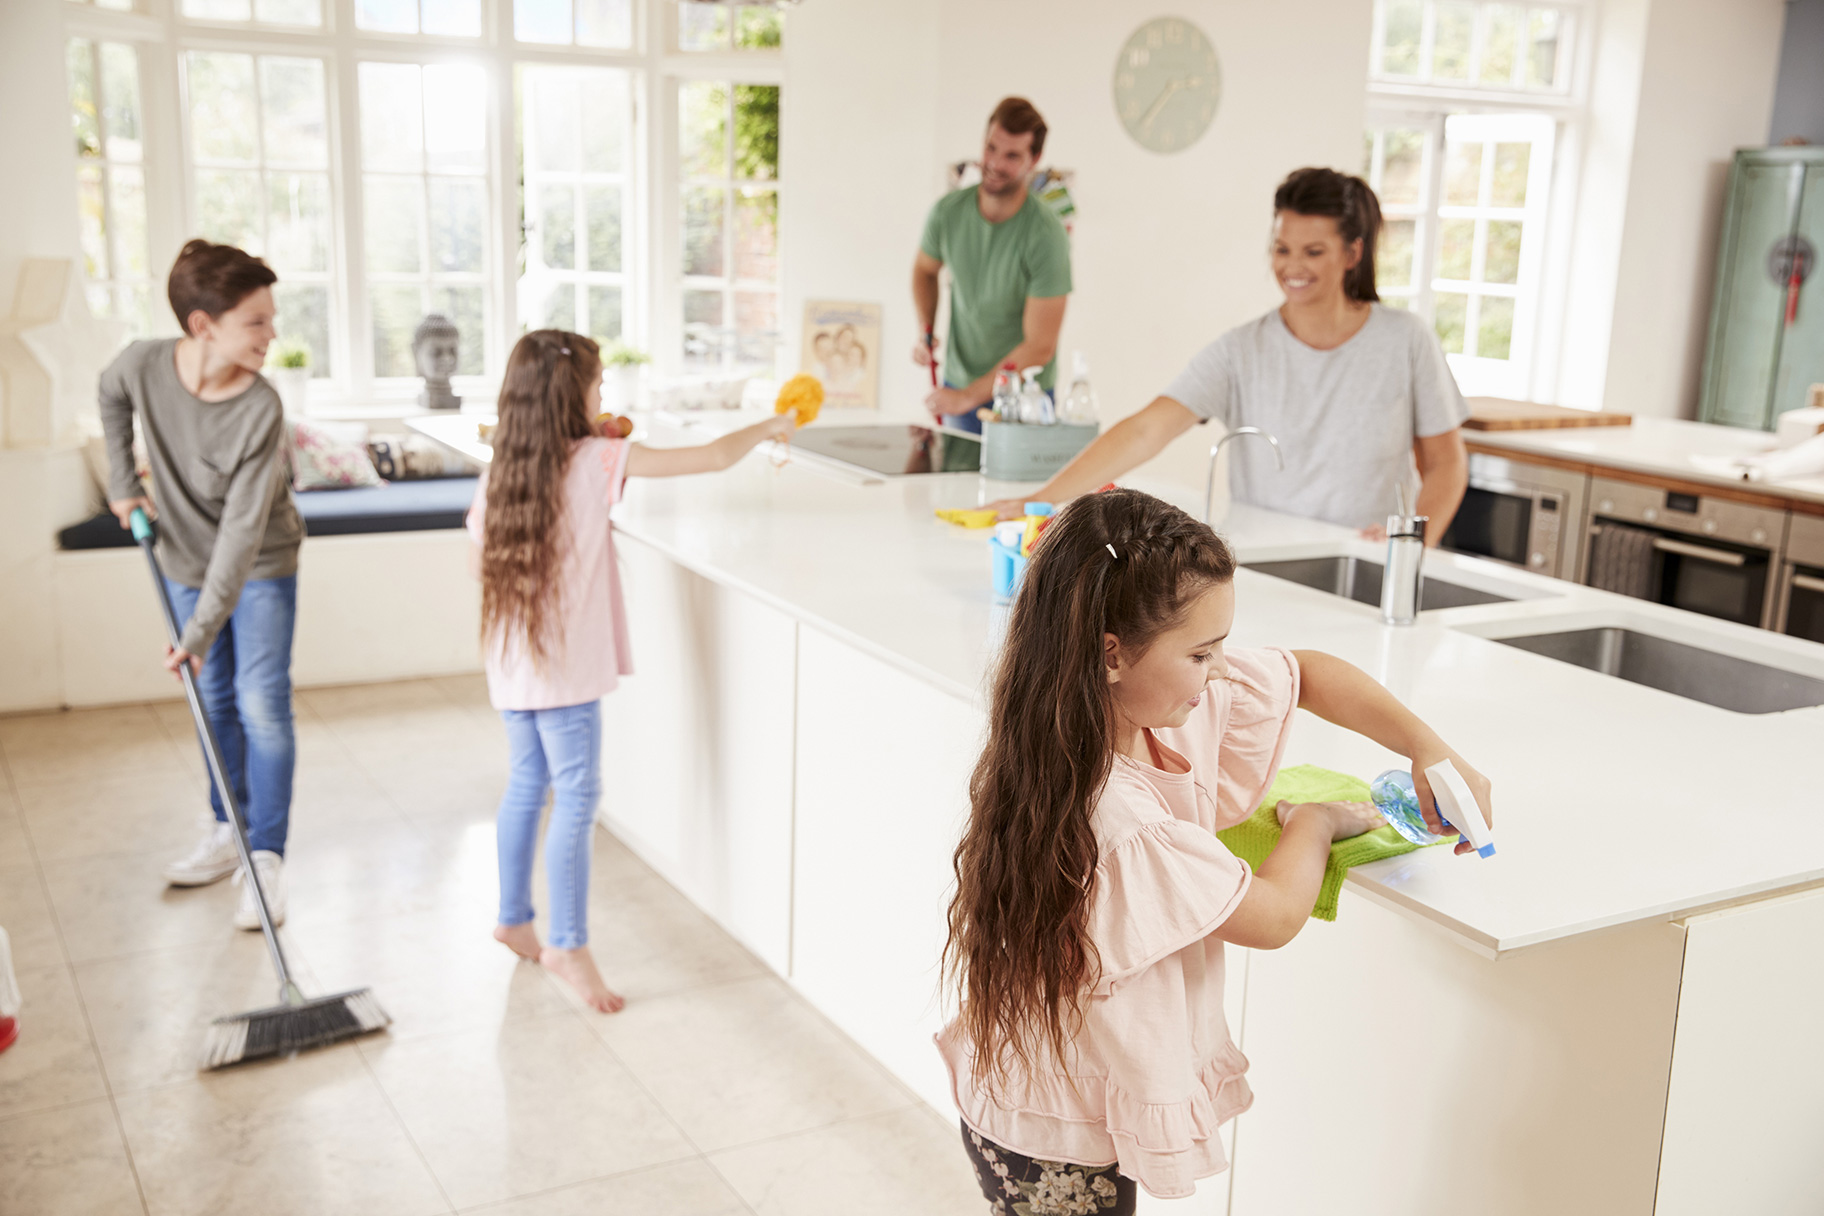 Keeping your kitchen clean and hygienic